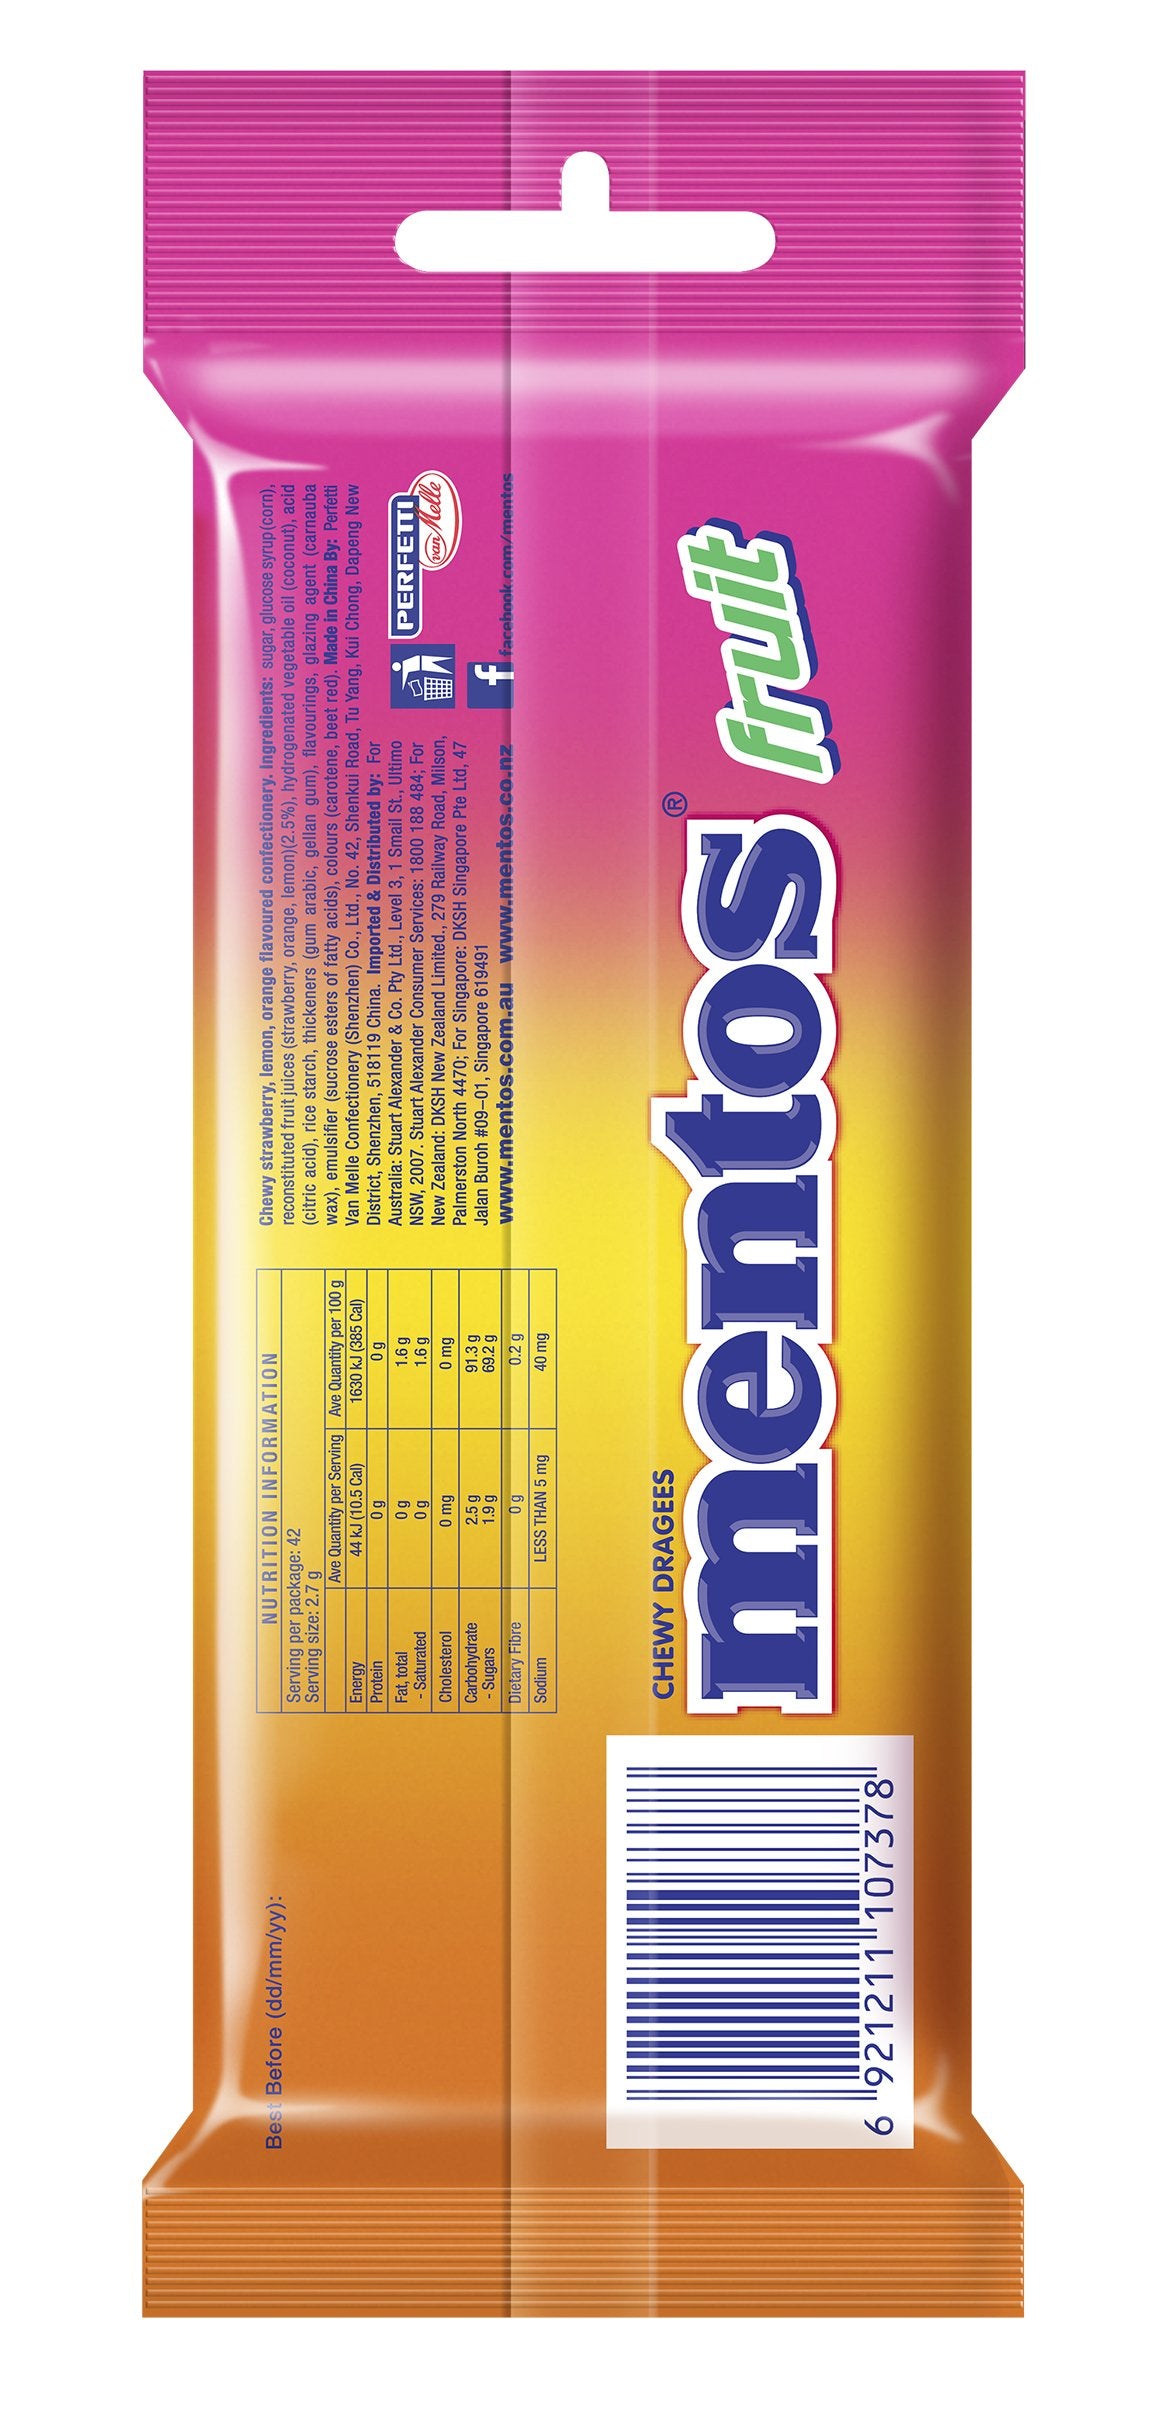 Mentos Fruit Candy Roll, 3 Pack (Box of 20)